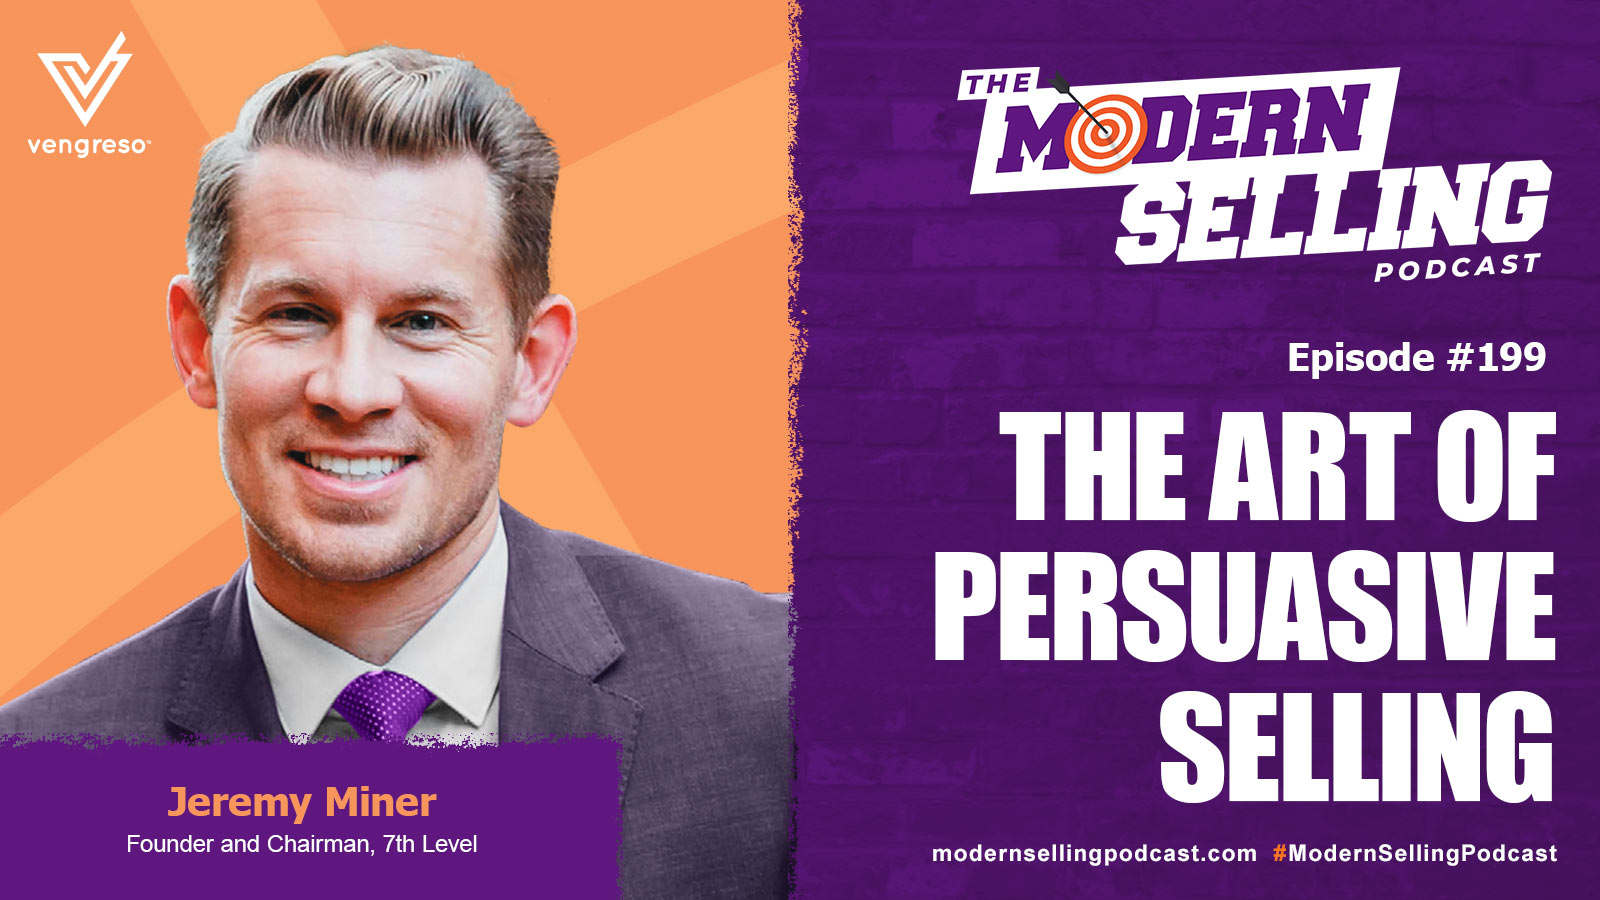 The Art of Persuasive Selling Podcast